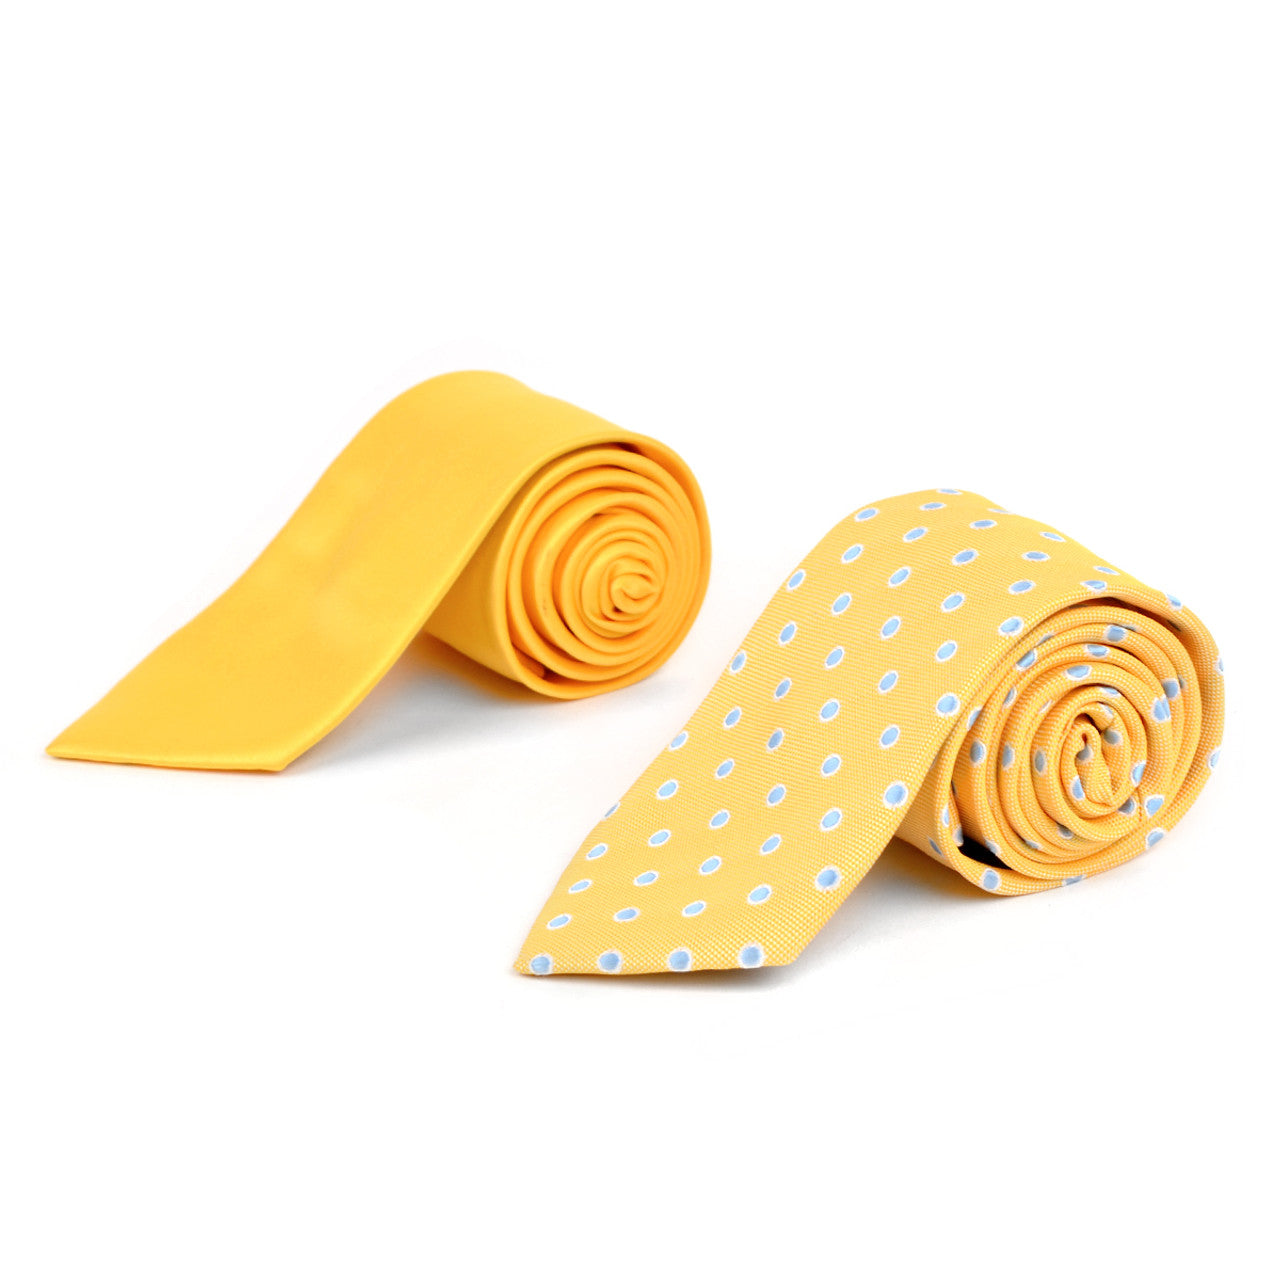 Dotted & Solid Tie with Matching Hanky Box Set